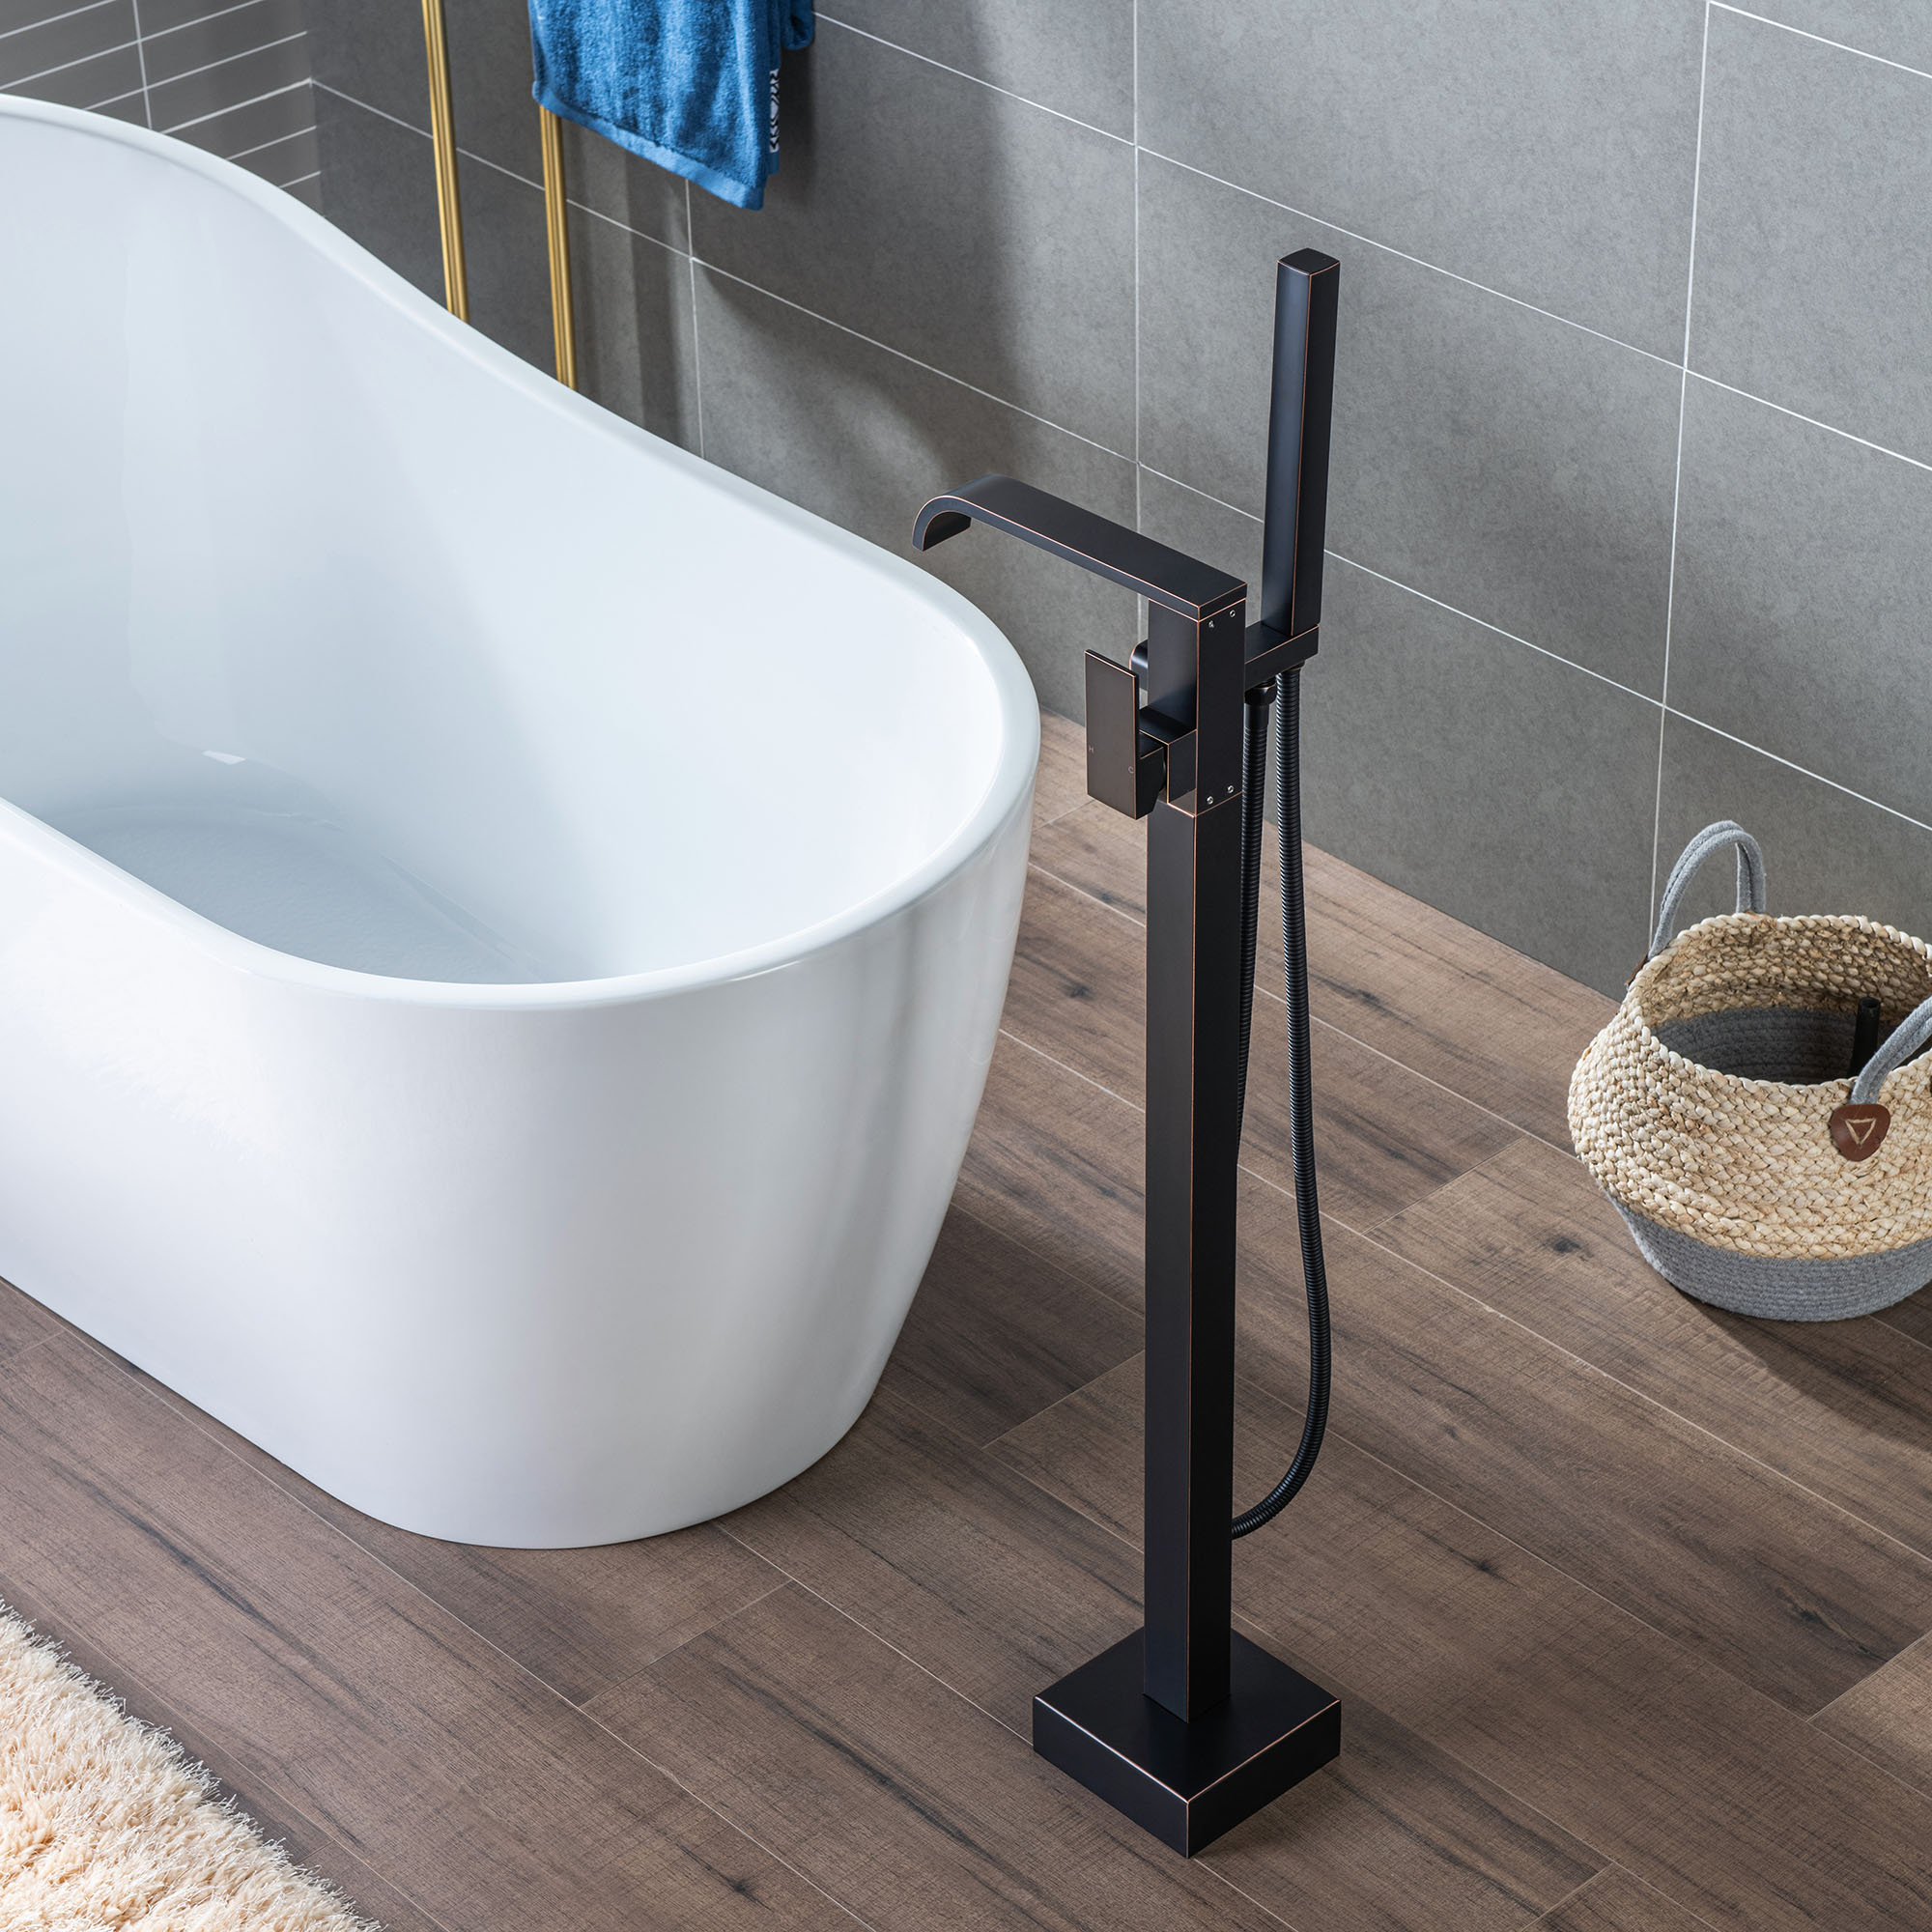  WOODBRIDGE F0038ORB Contemporary Single Handle Floor Mount Freestanding Tub Filler Faucet with Hand shower in Oil Rubbed Bronze Finish._12817